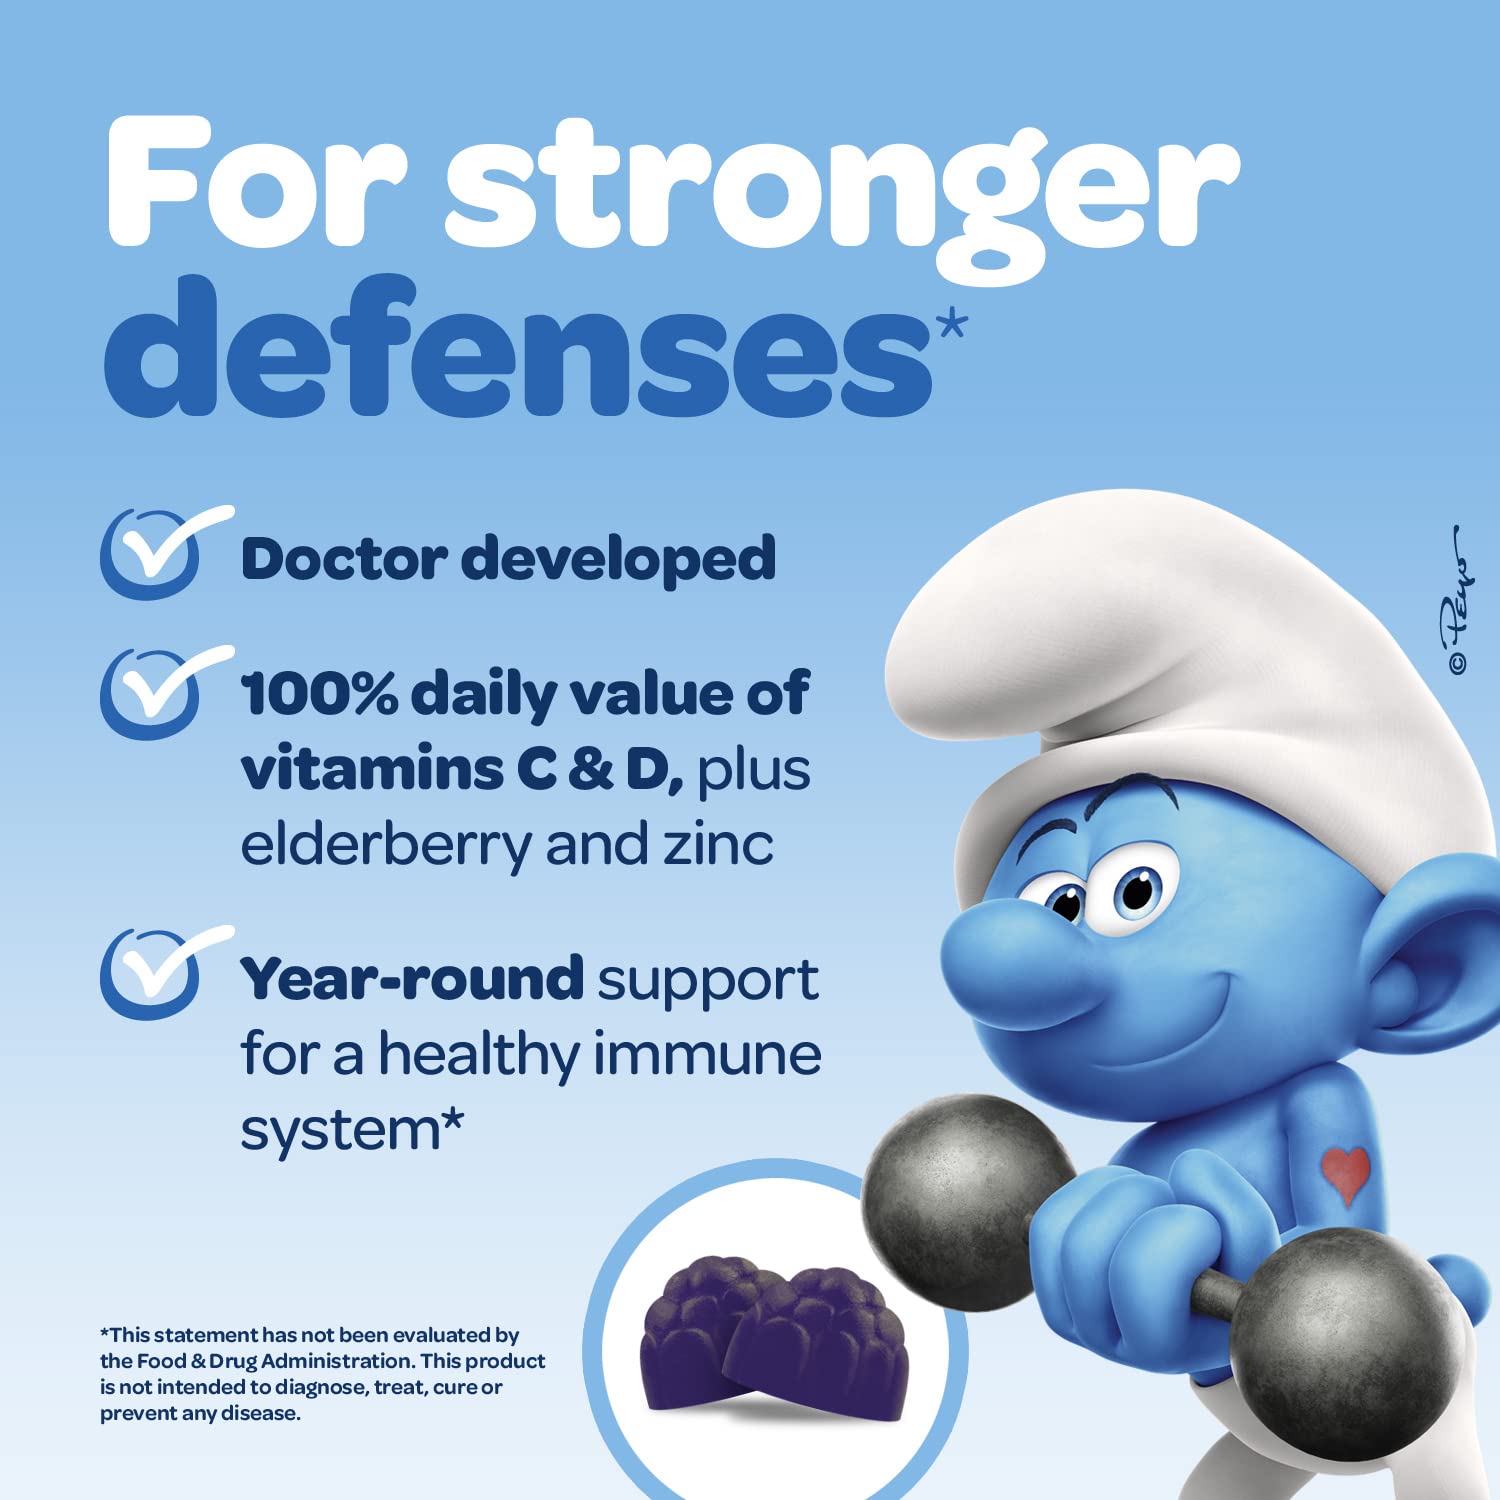 The Smurfs Immune Support Supplement Vitamins for Kids with Elderberry, Zinc, Vitamin C & D for Immune Defense Age 3+ | Made with Real Fruit in a Smurf Berry | Doctor Developed & Non-GMO | 40 Gummies